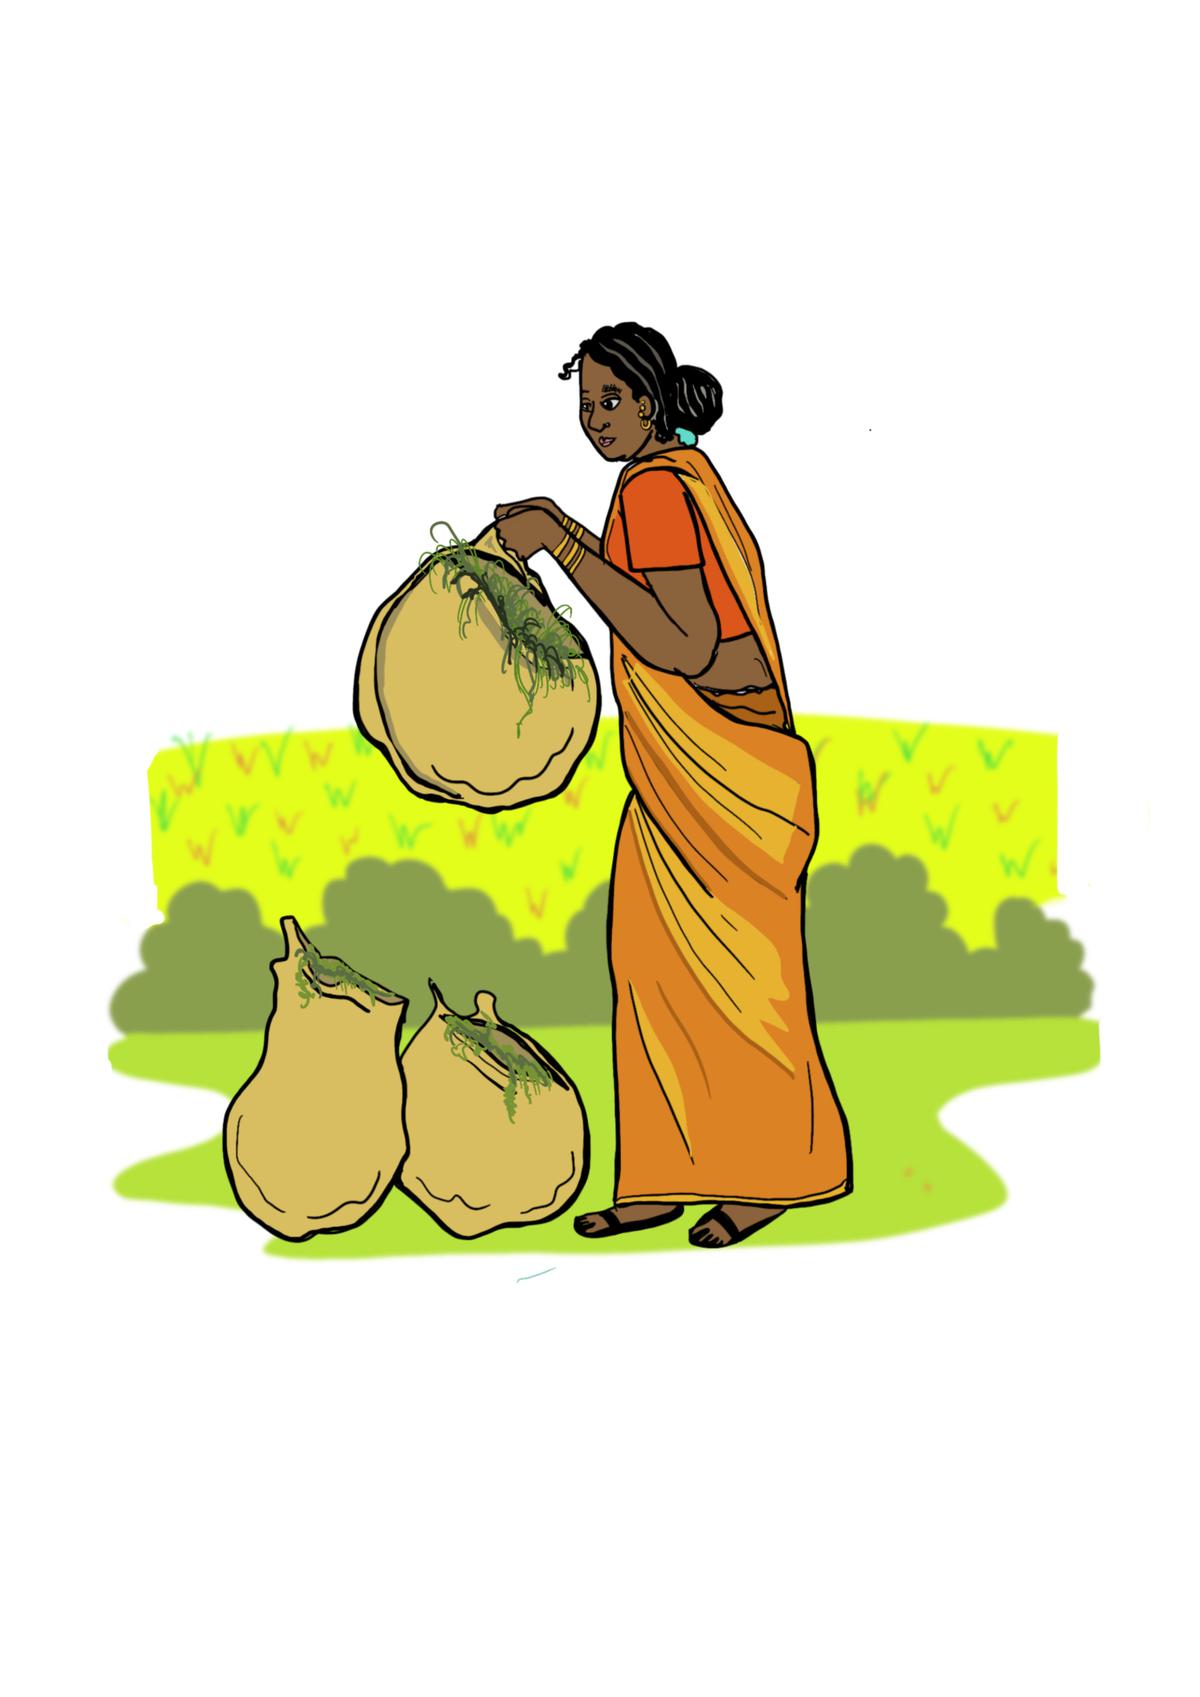 Illustration of woman with wild herbs from the book Chasing Soppoo